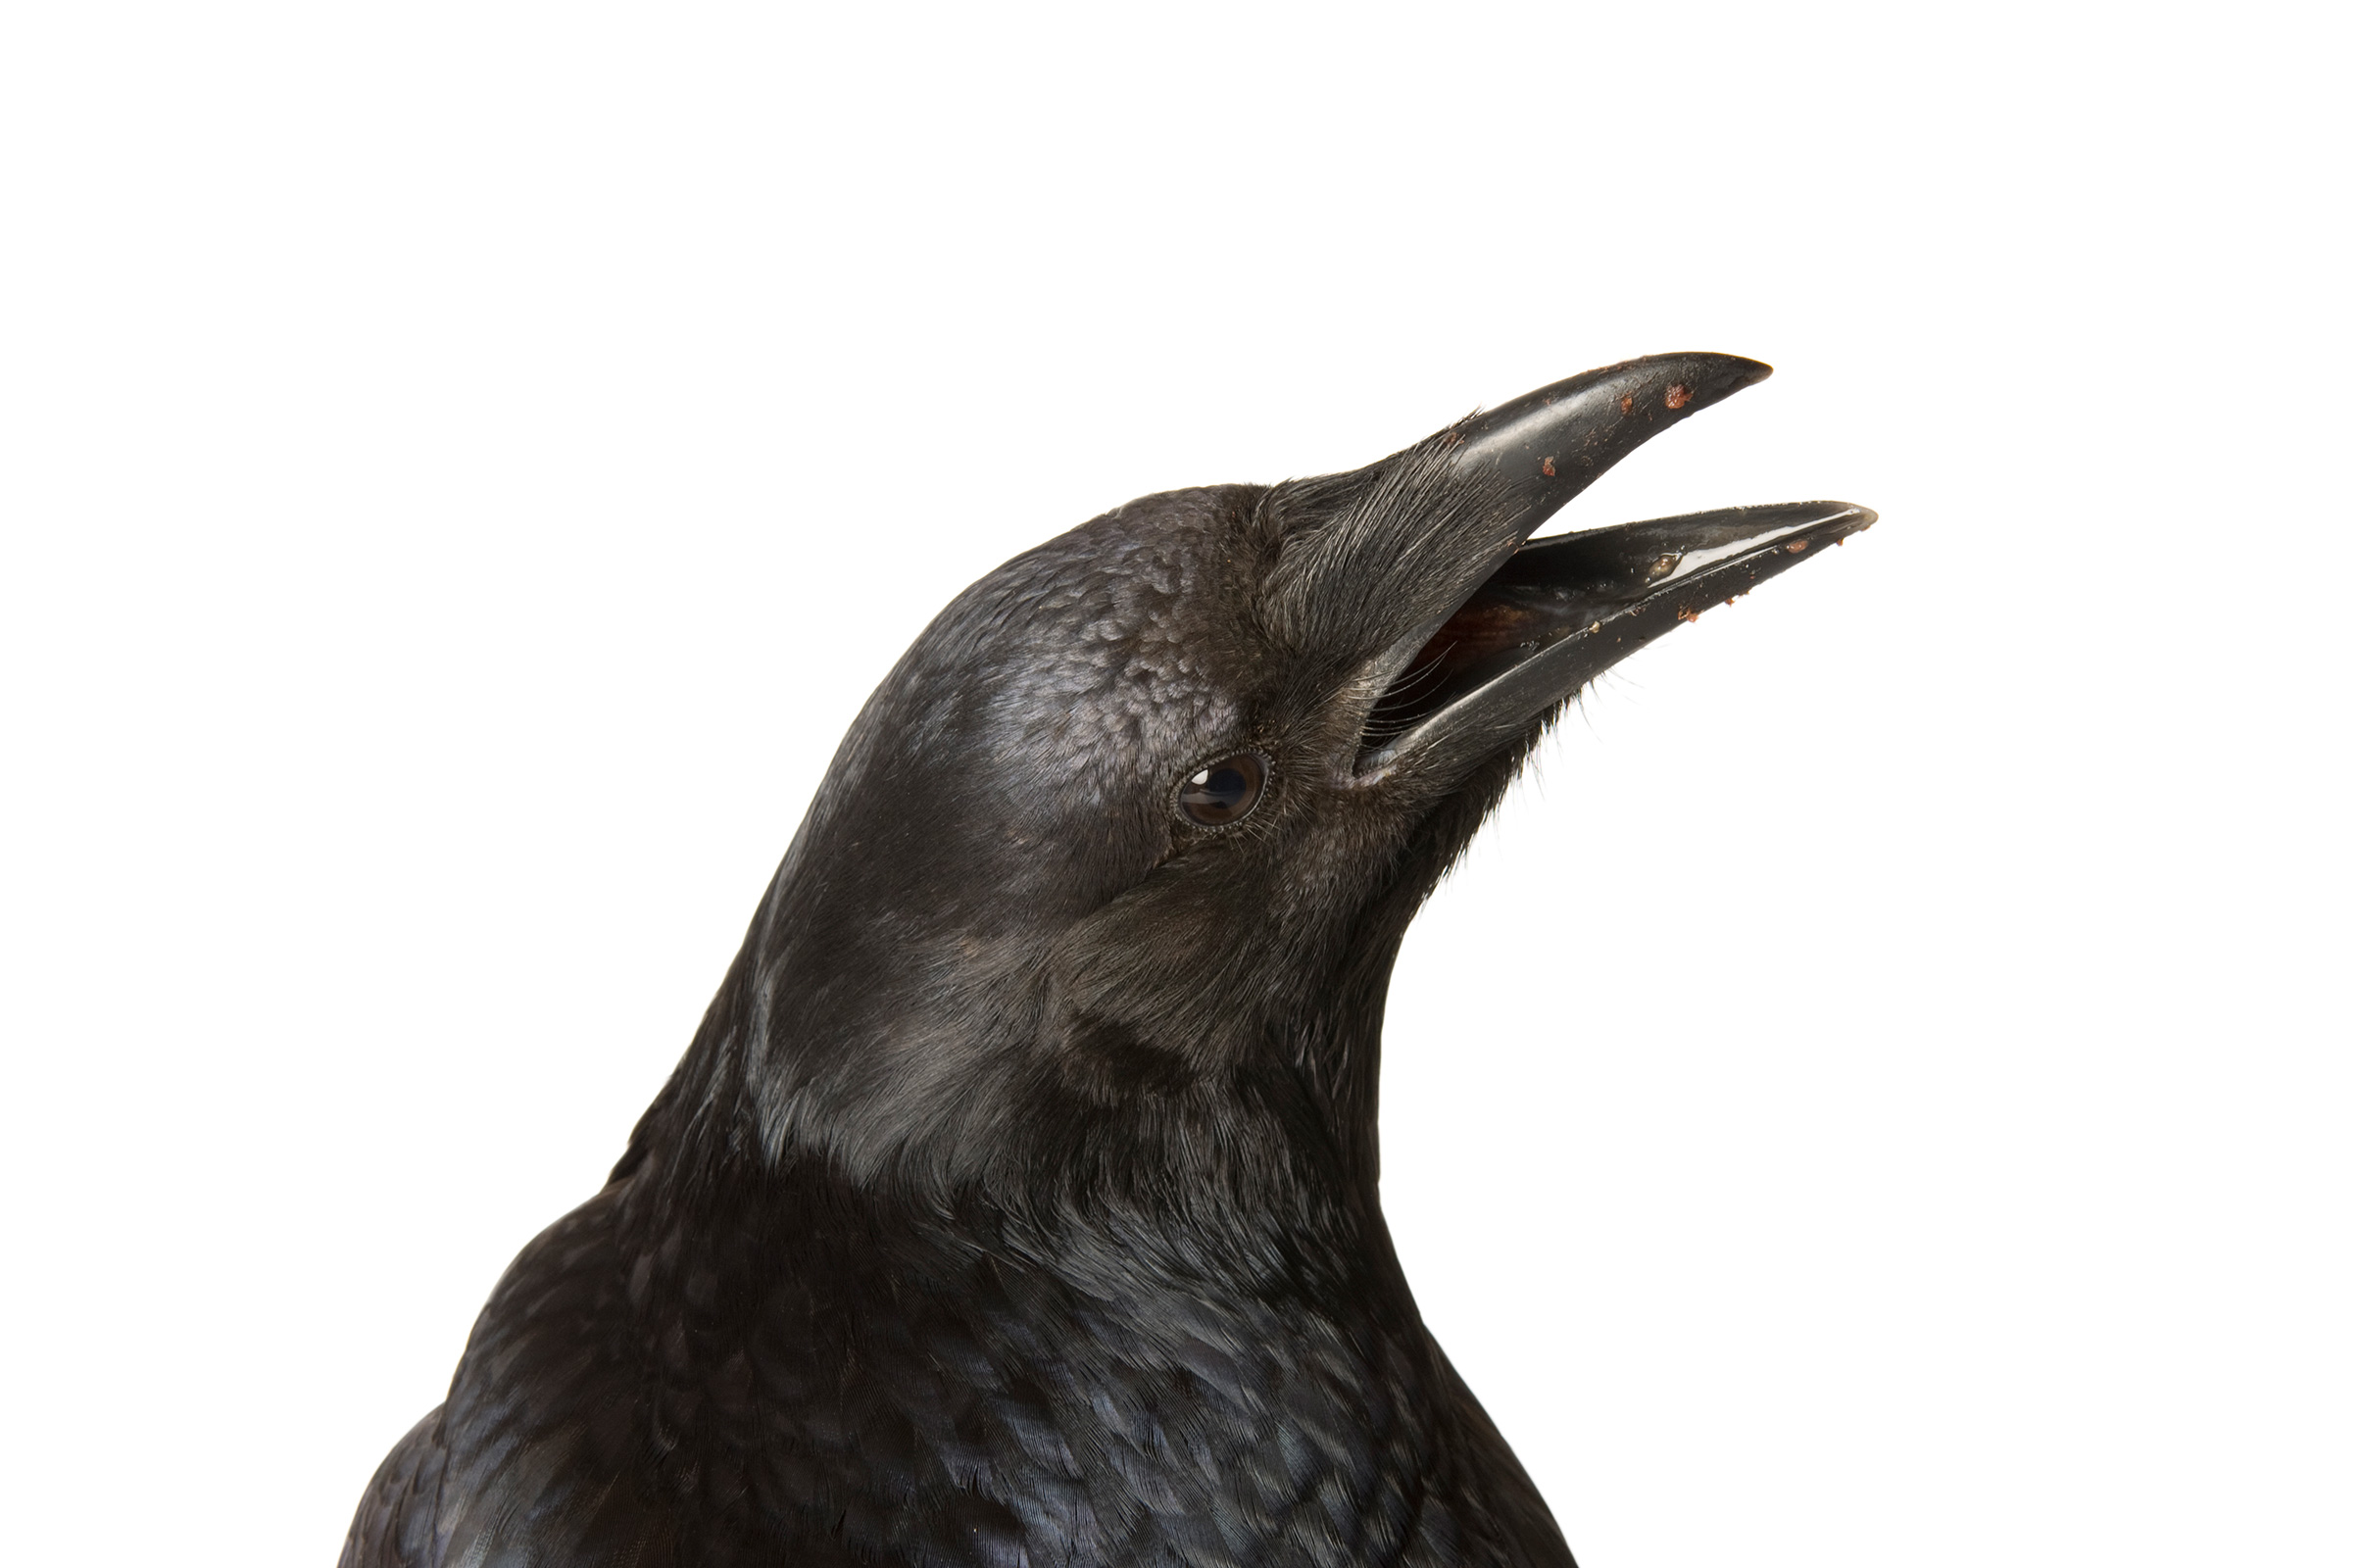 Bay Nature: Crows are Wicked Smart. Should We Still Kill Them?